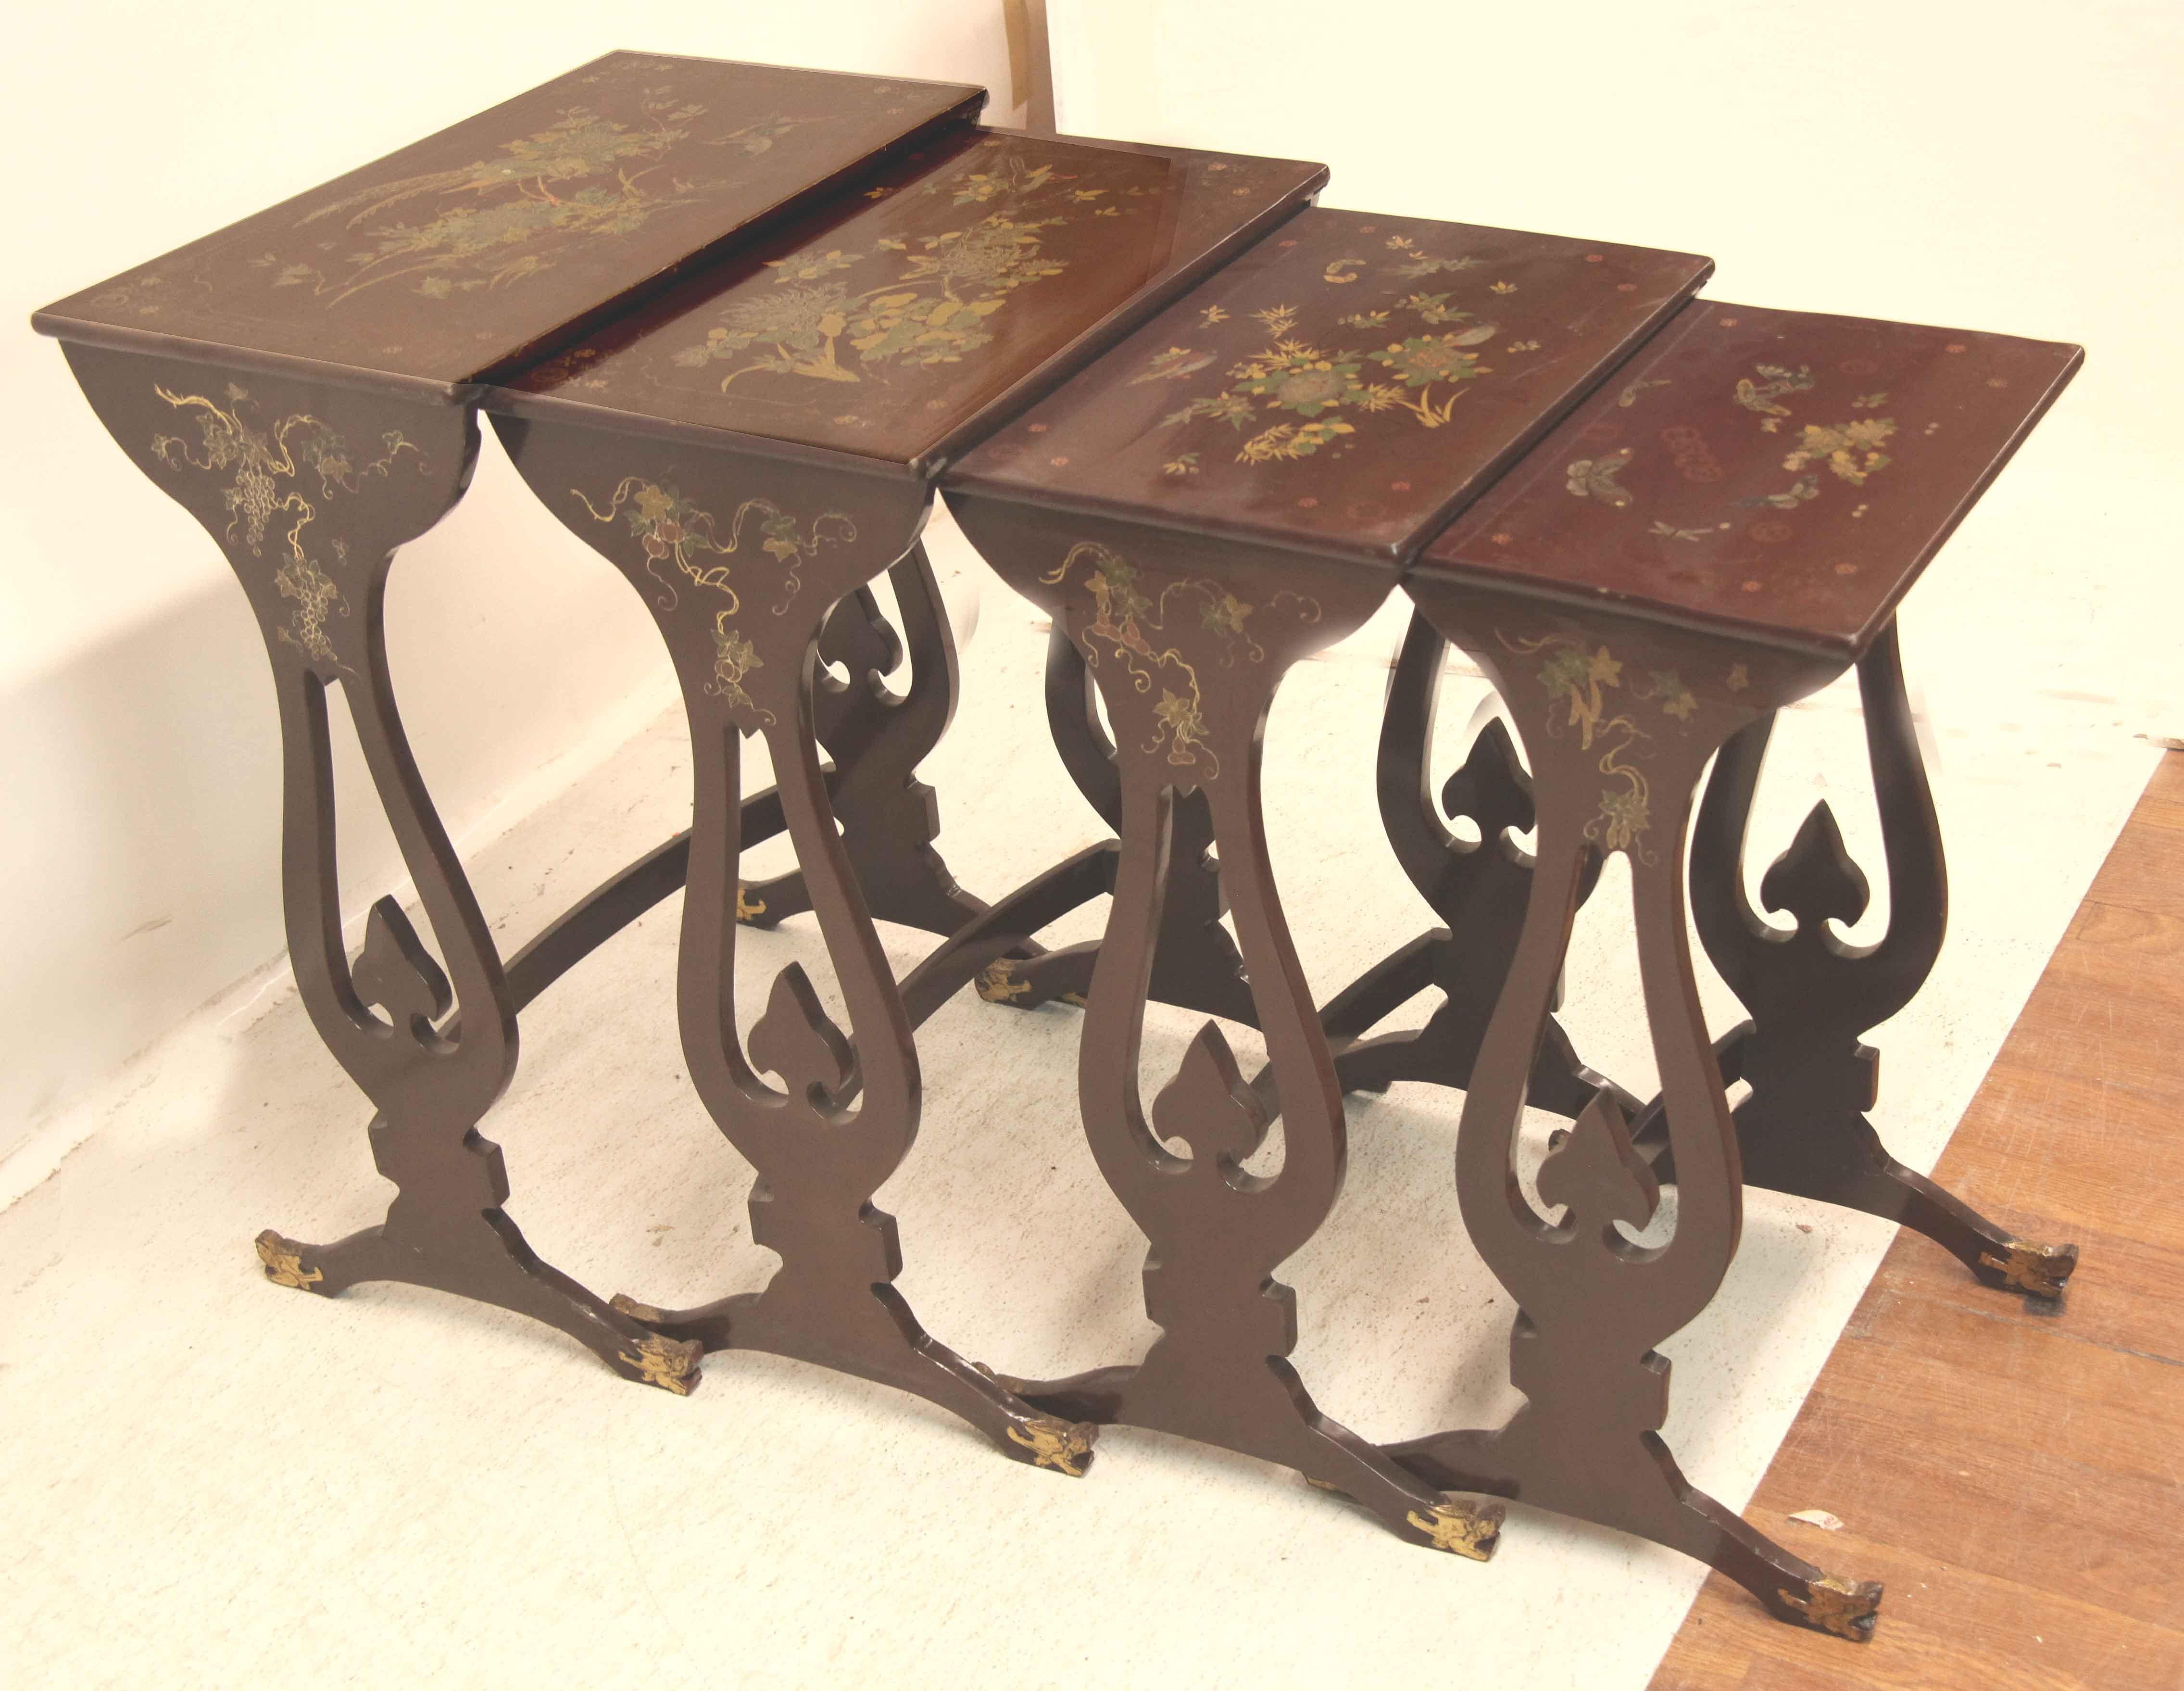 Nest of four lacquer tables, each top with a different scene but similar features- birds, flowers, foliage, butterflies and dragonflies.  The sides have an open design and terminate with a dragon's head.  